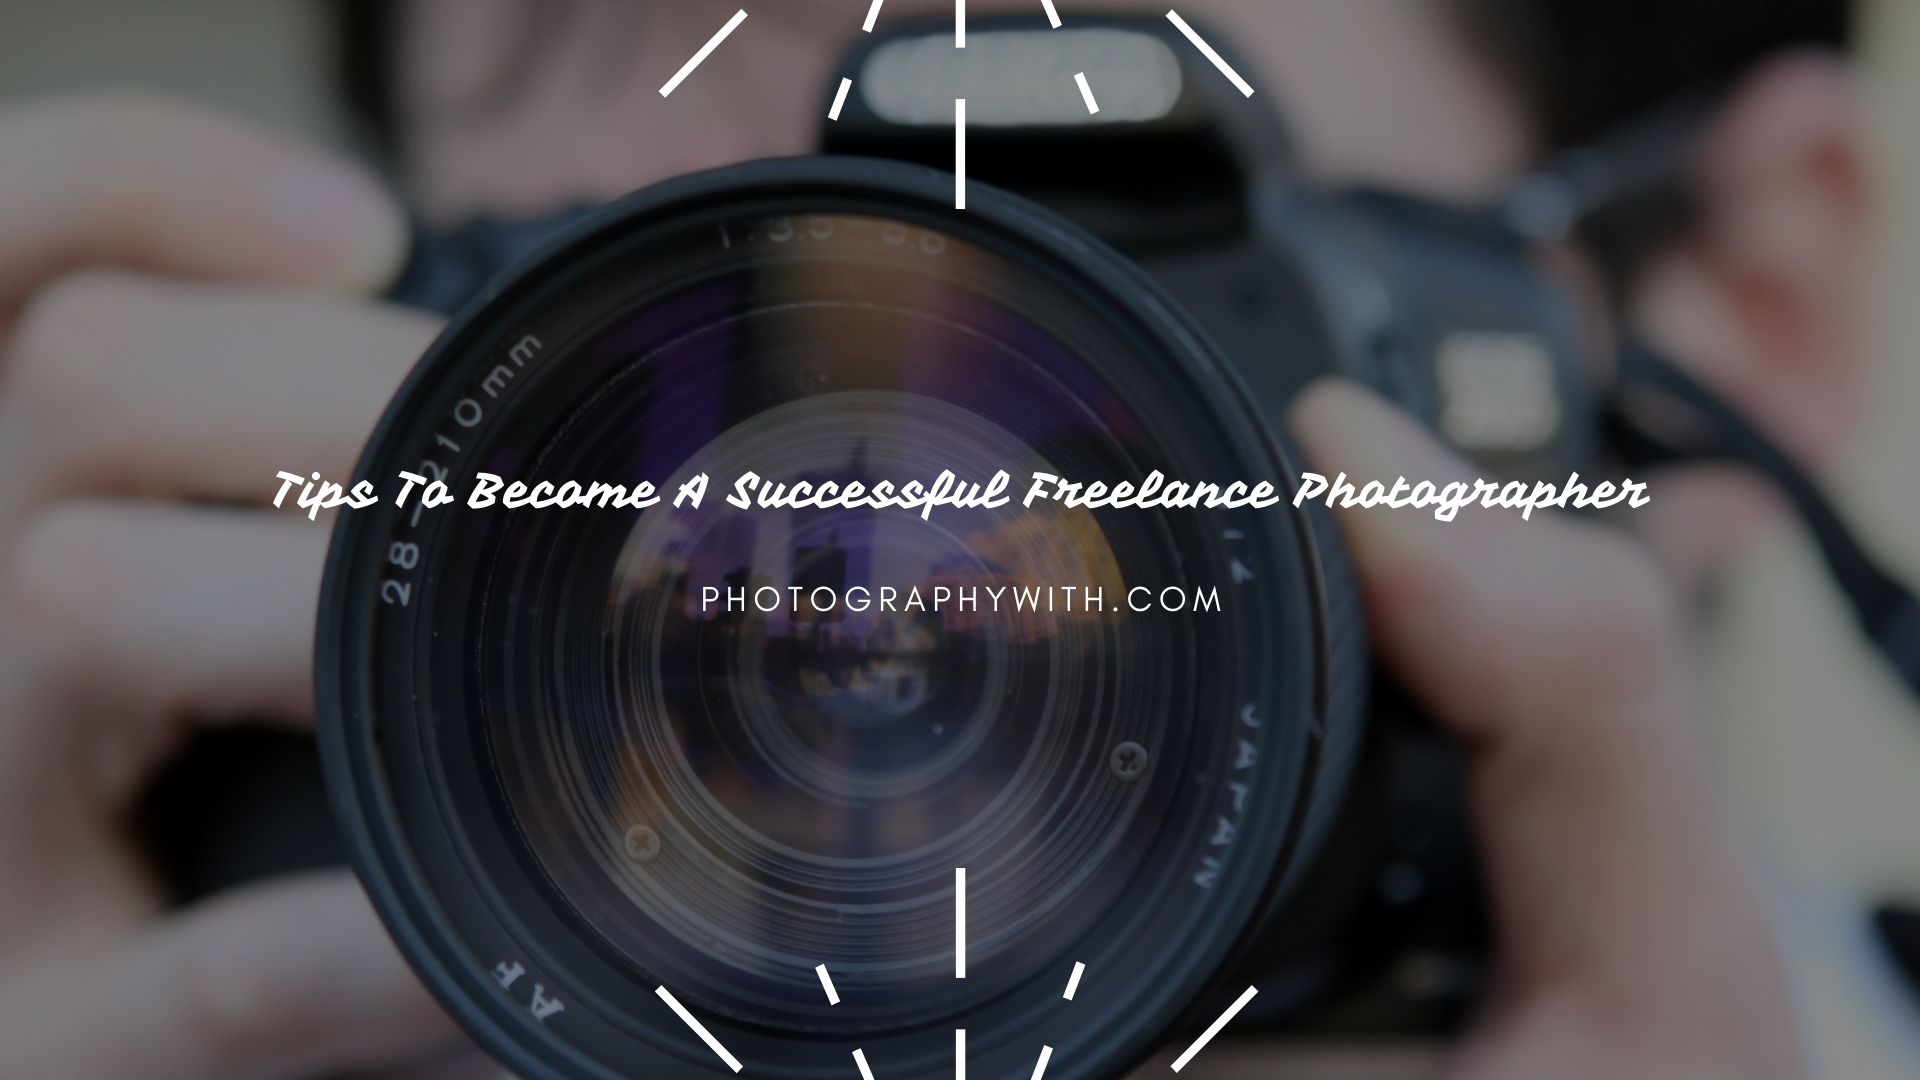 Tips To Become A Successful Freelance Photographer